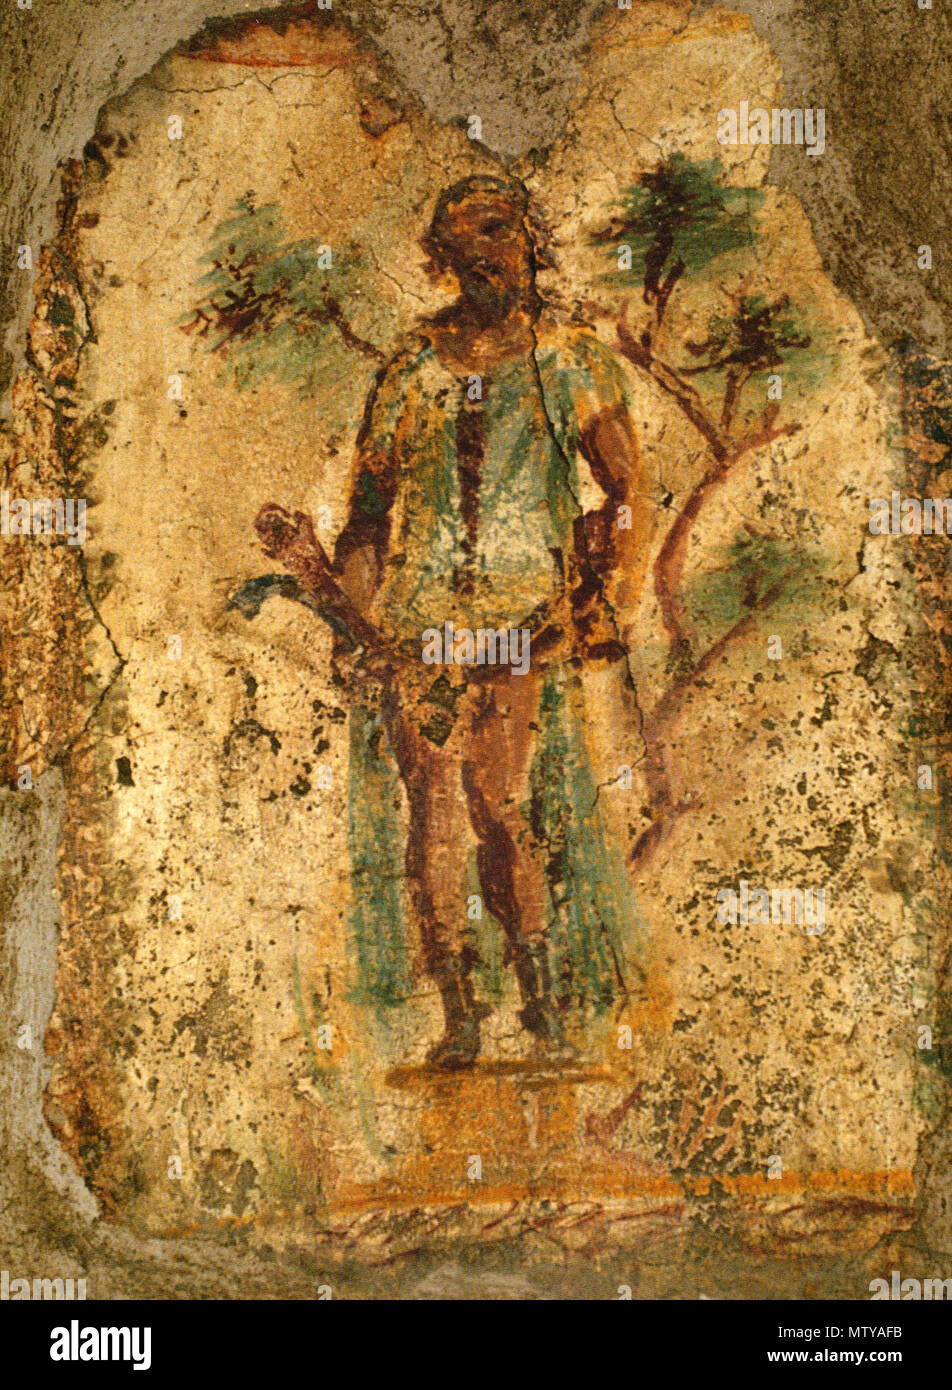 . English: Priapus with double phallus. Fresco from the Lupanar in Pompeii. North wall, between rooms c and d. Ca. 70-79 AD. 21 July 2010. Wolfgang Rieger 492 Pompeii - Lupanar - Priapus Stock Photo